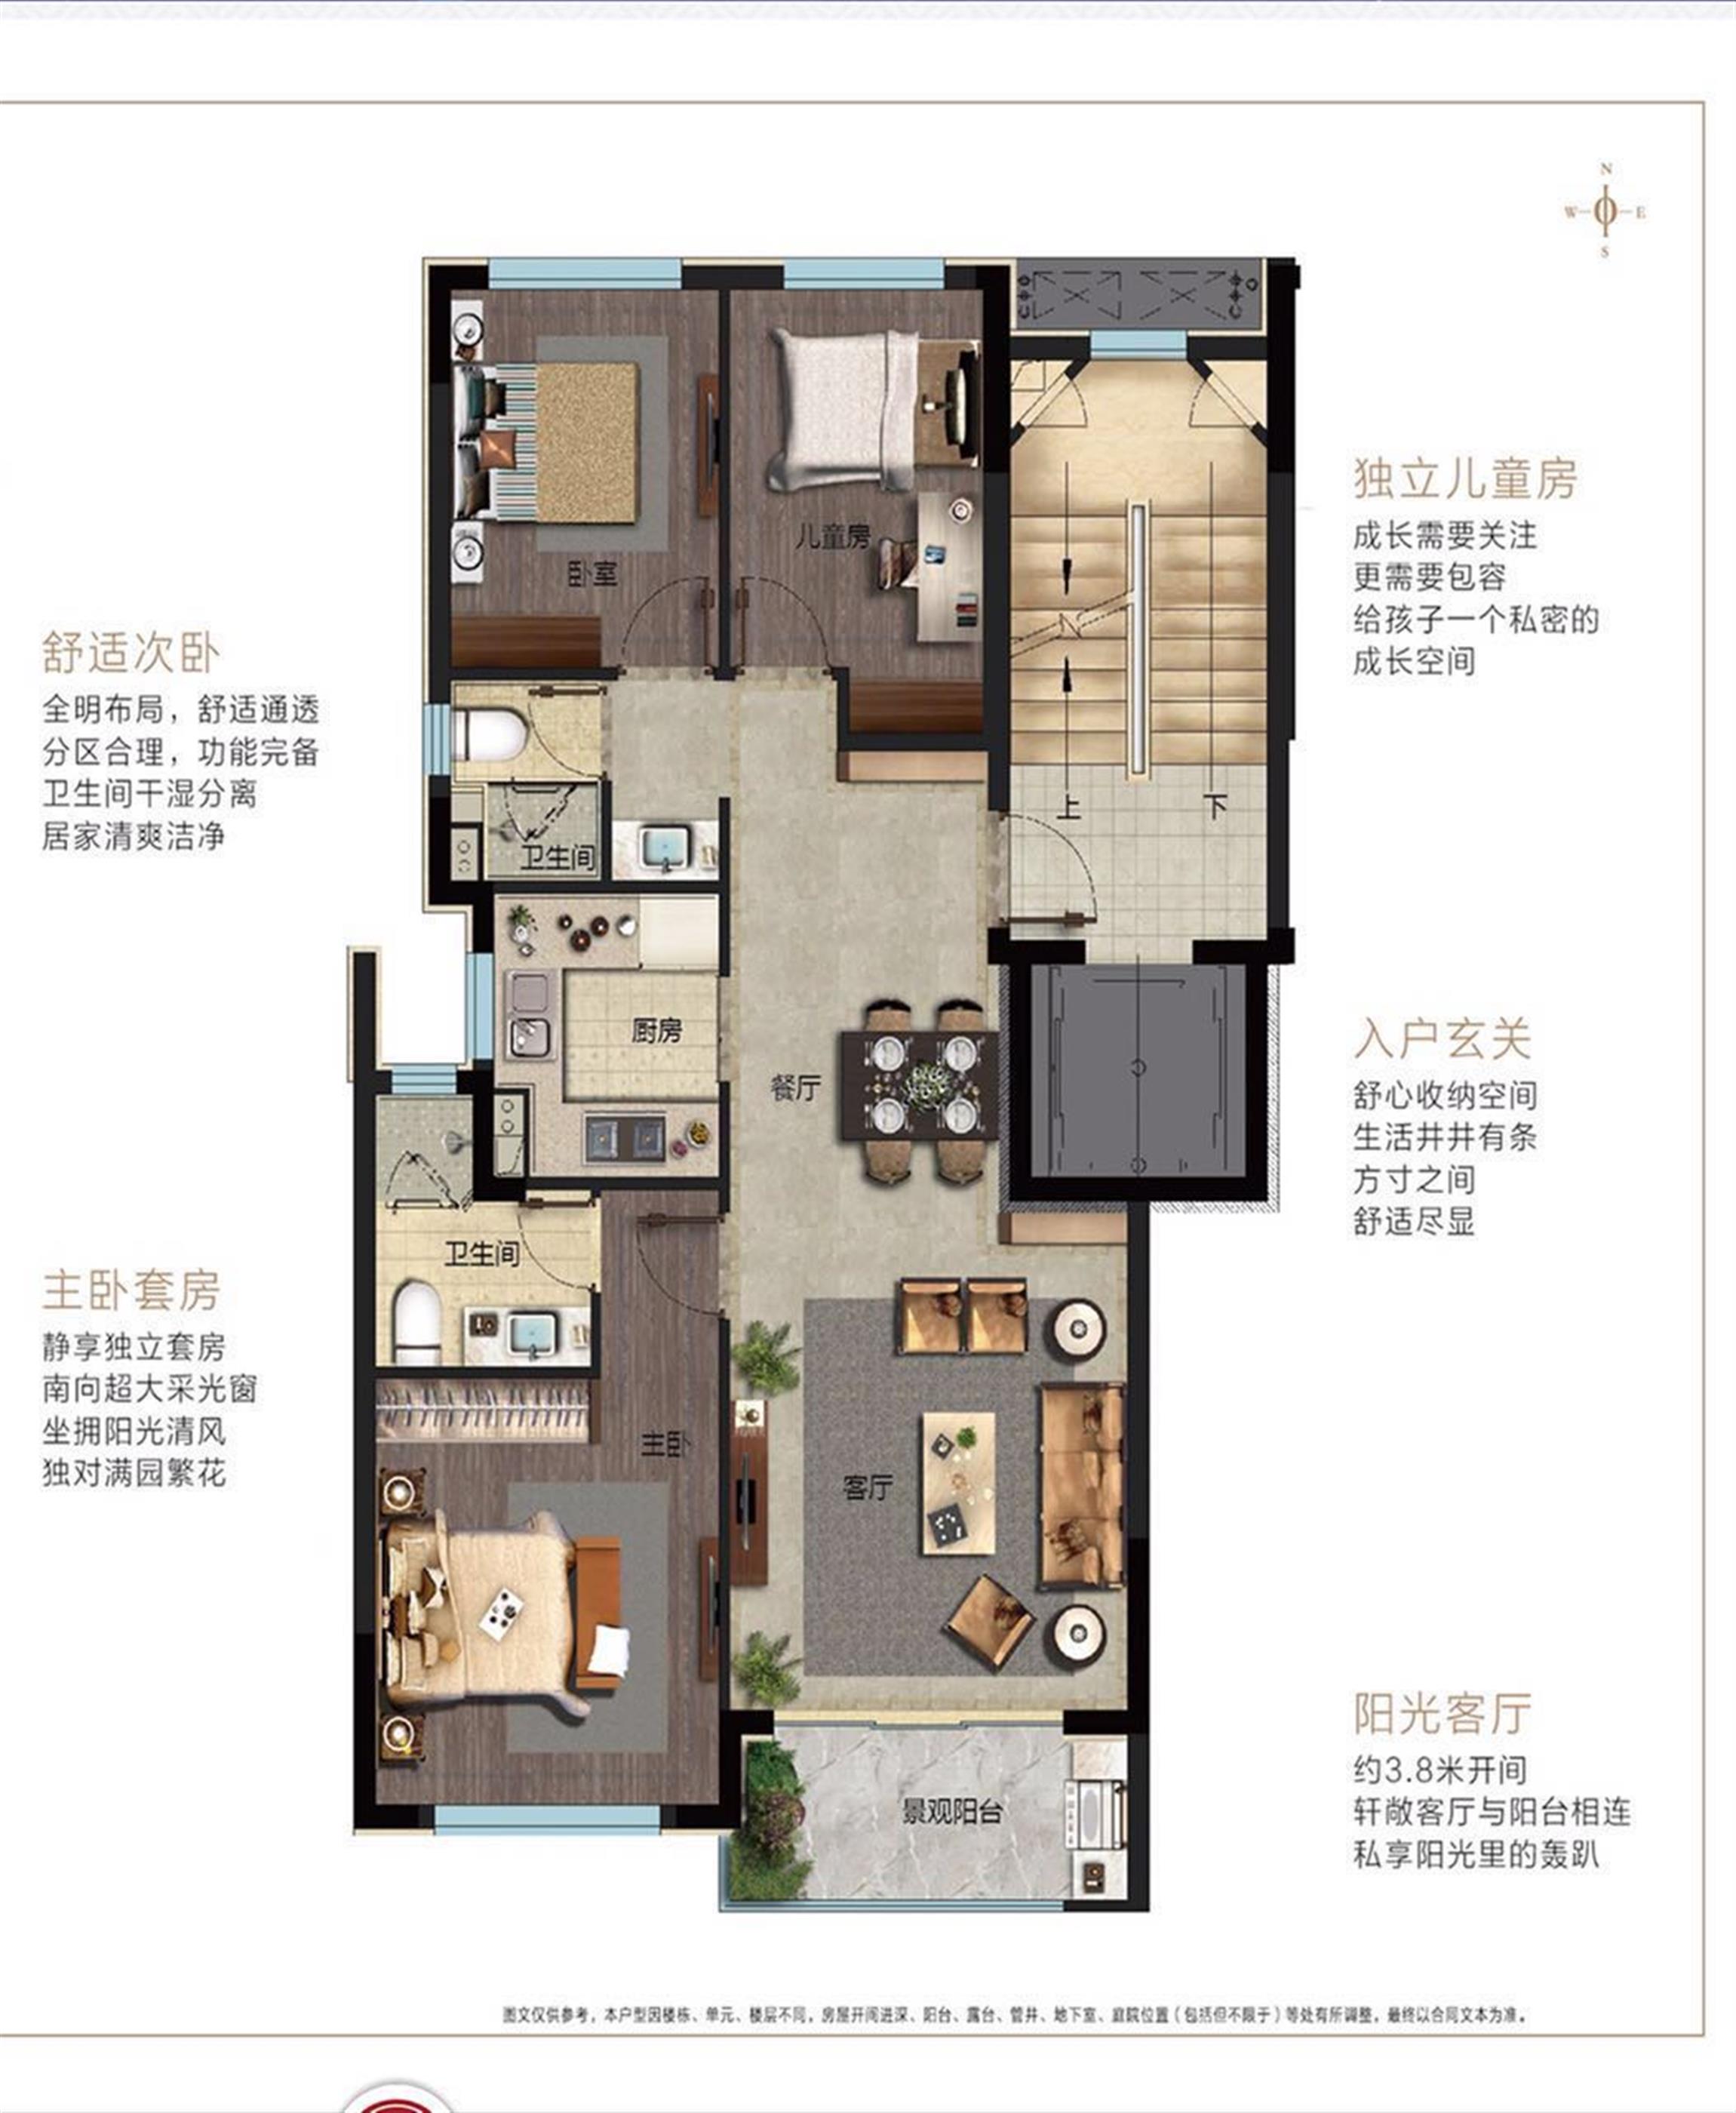 Layout Brand New Sunny Apartment nr LN 10 for Rent in Hongkou Shanghai